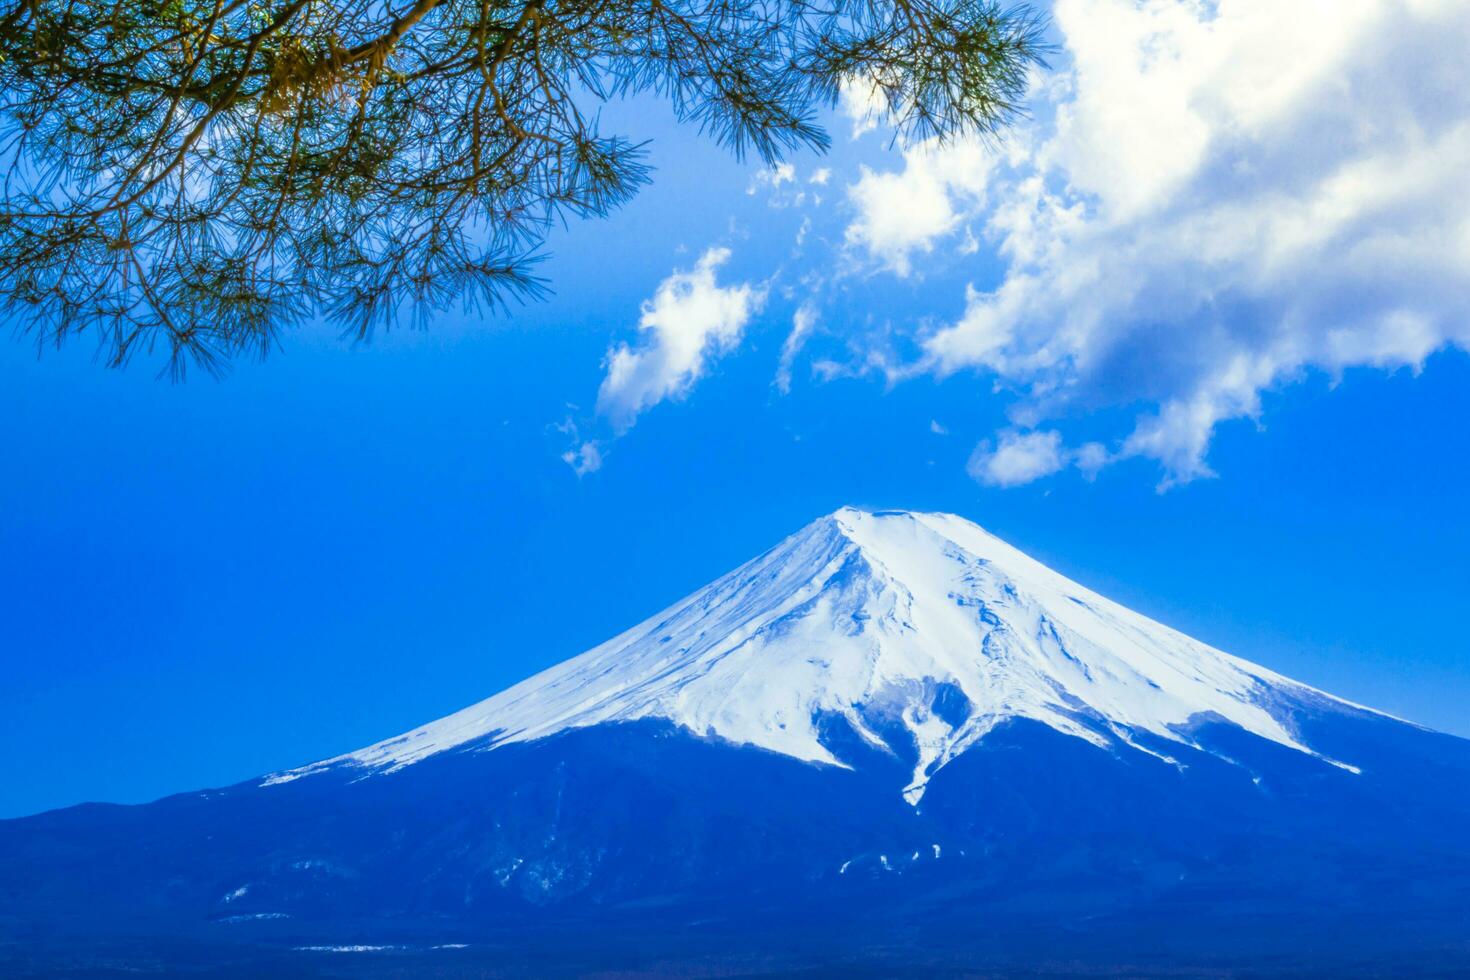 Mountain Fuji of snow on top in japan with blue sky and clouds, beautiful landscape view background photo